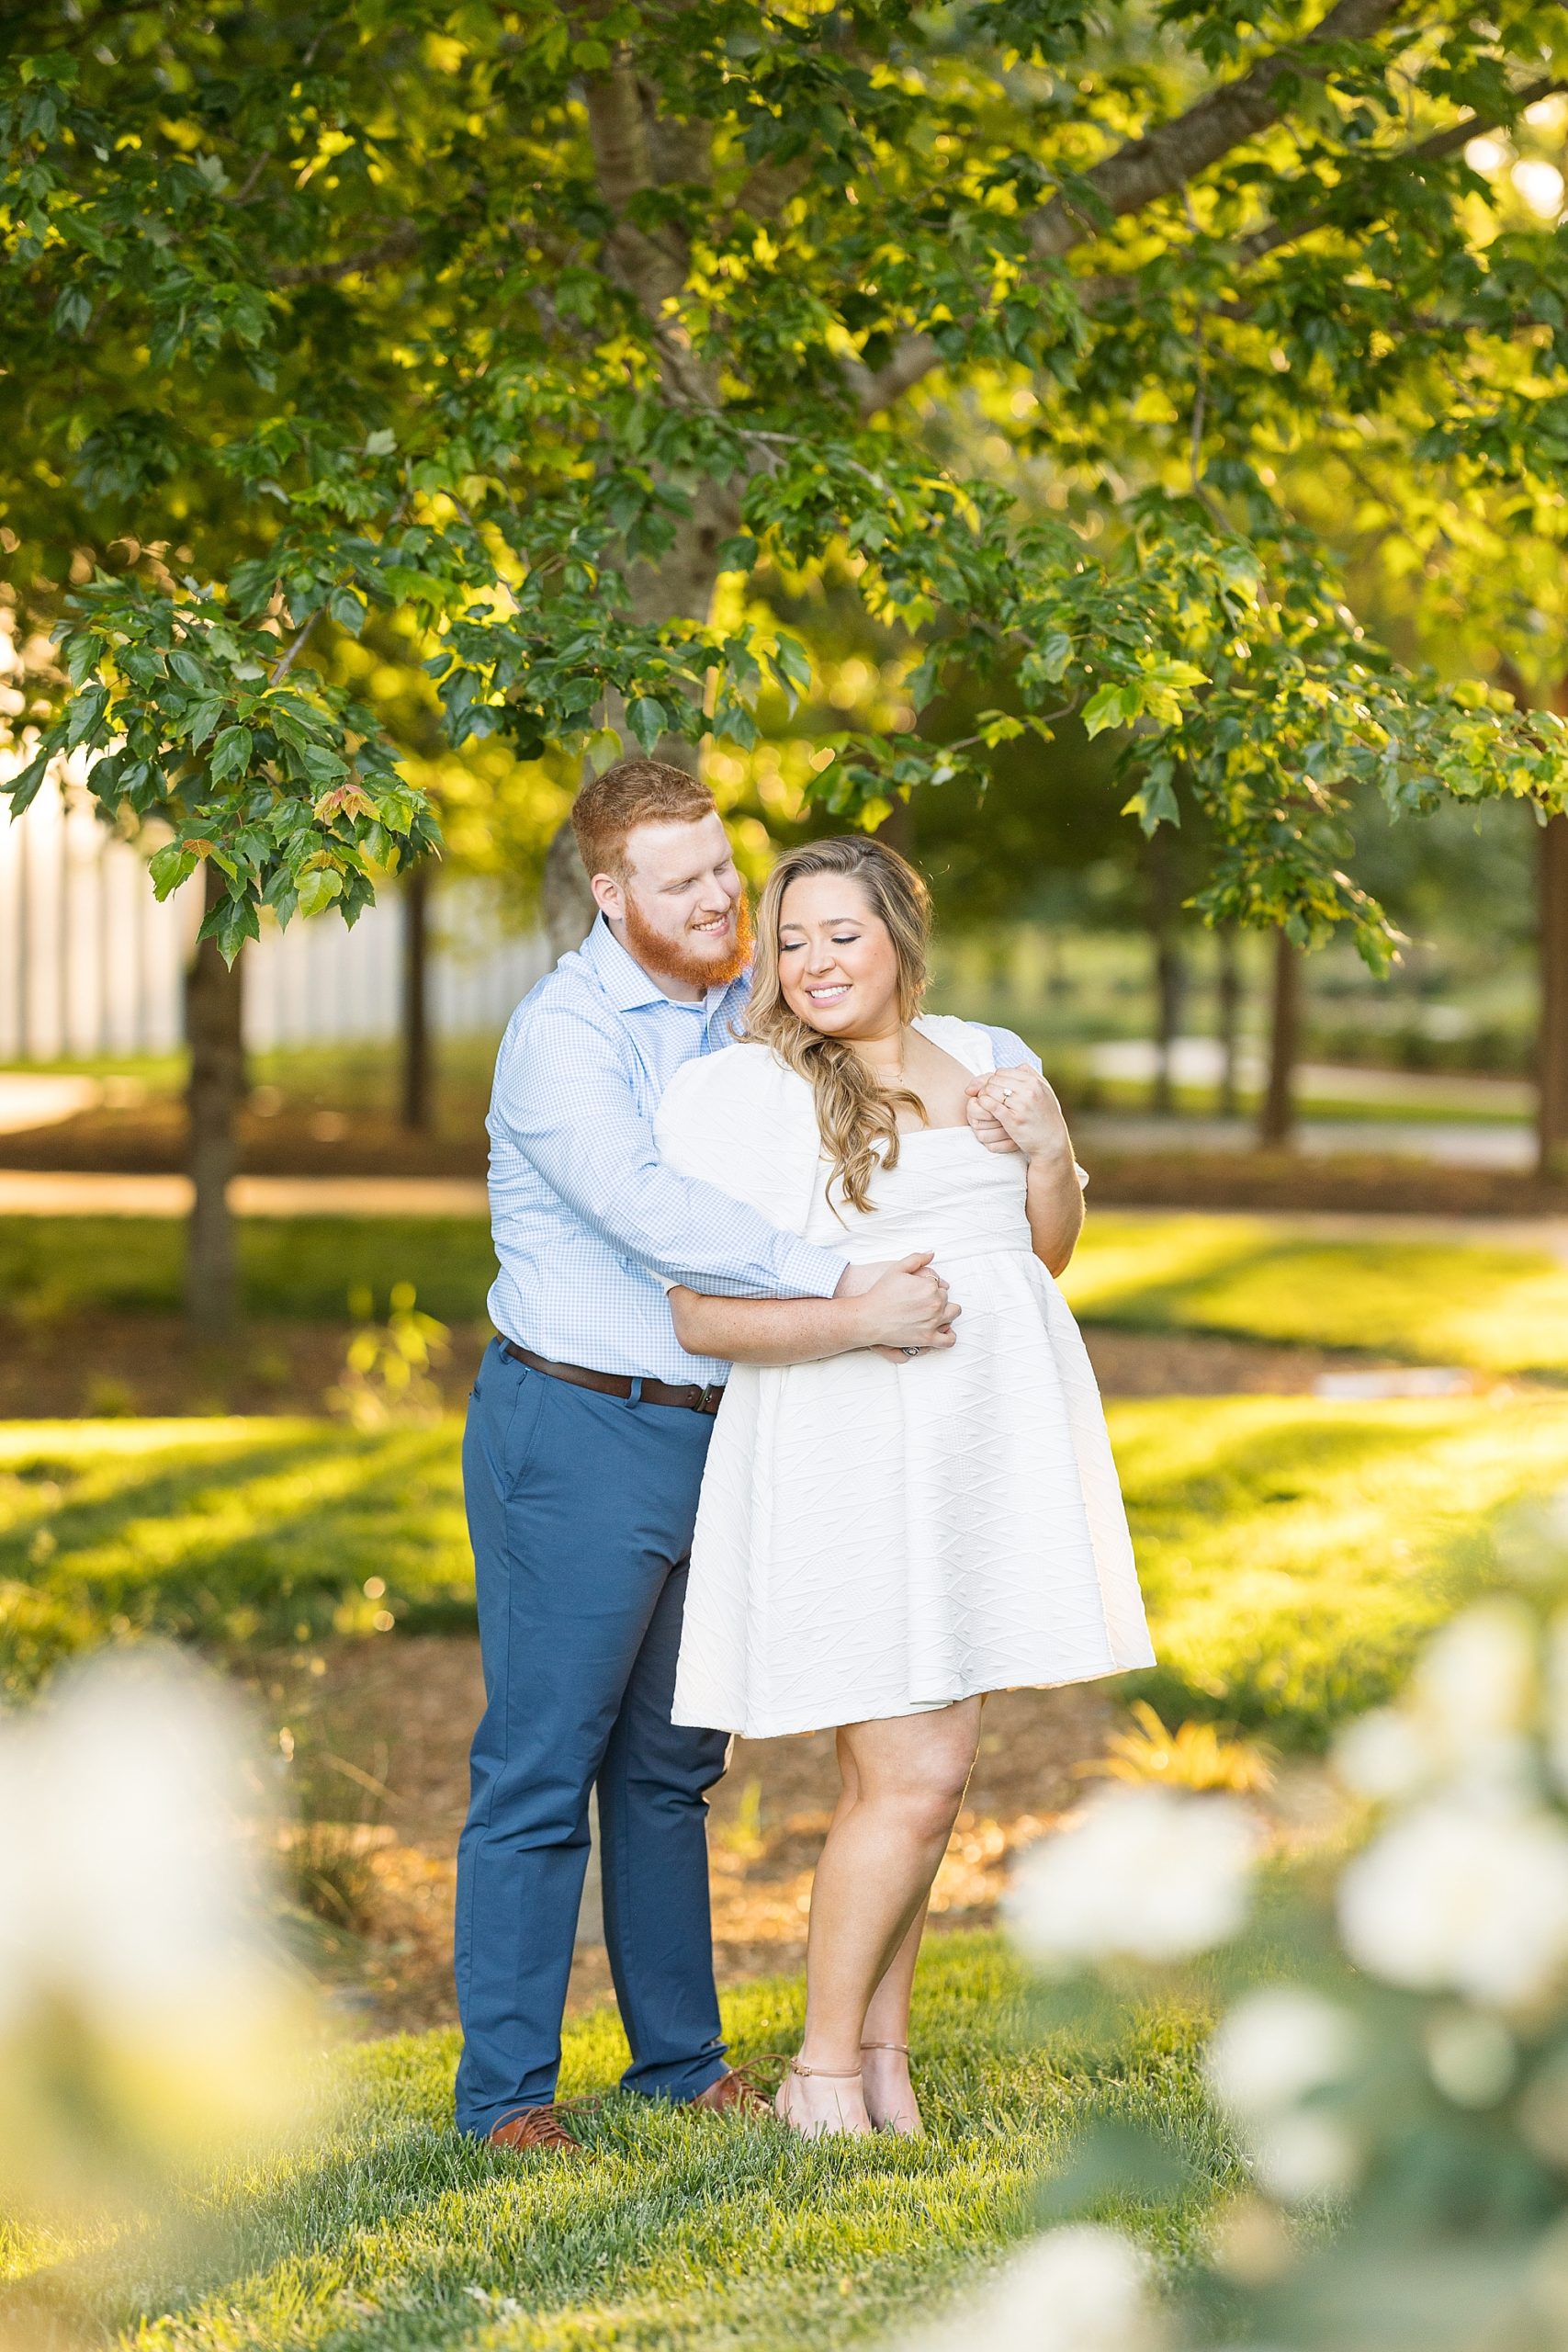 Light and airy engagement photos in Raleigh | Raleigh NC Engagement Photographer